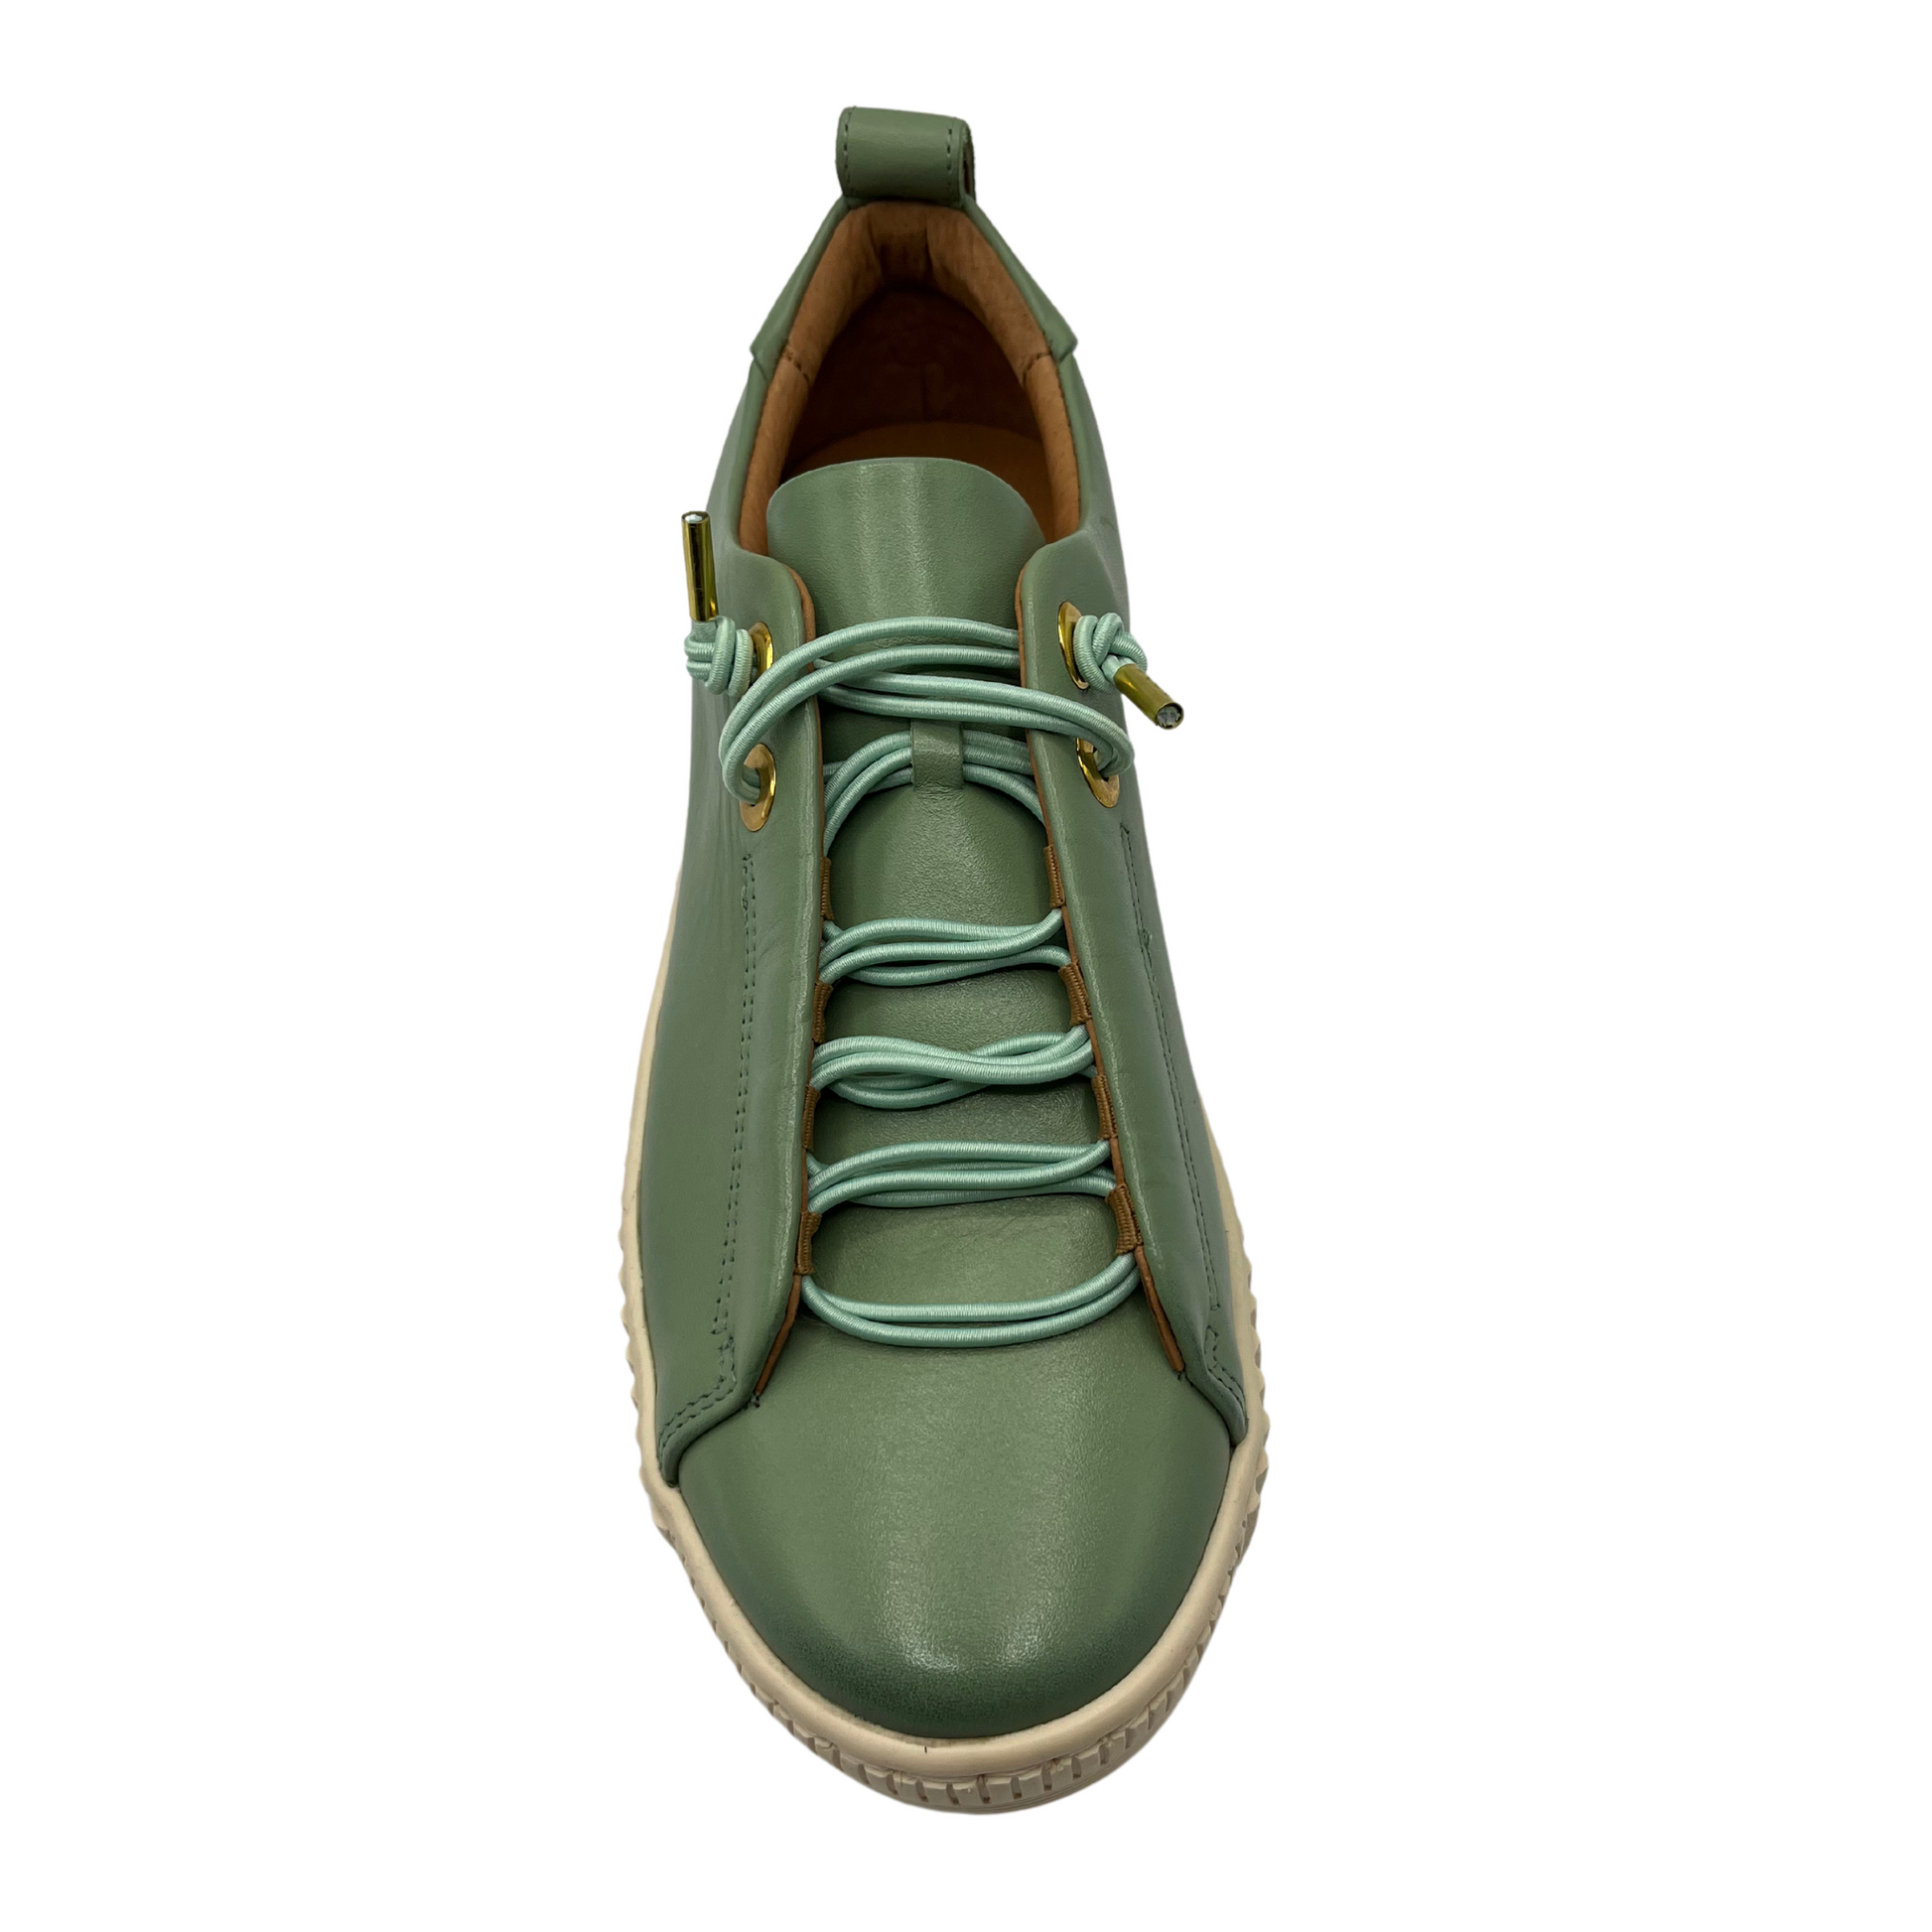 Top view of green leather sneaker with rounded toe and off white rubber outsole